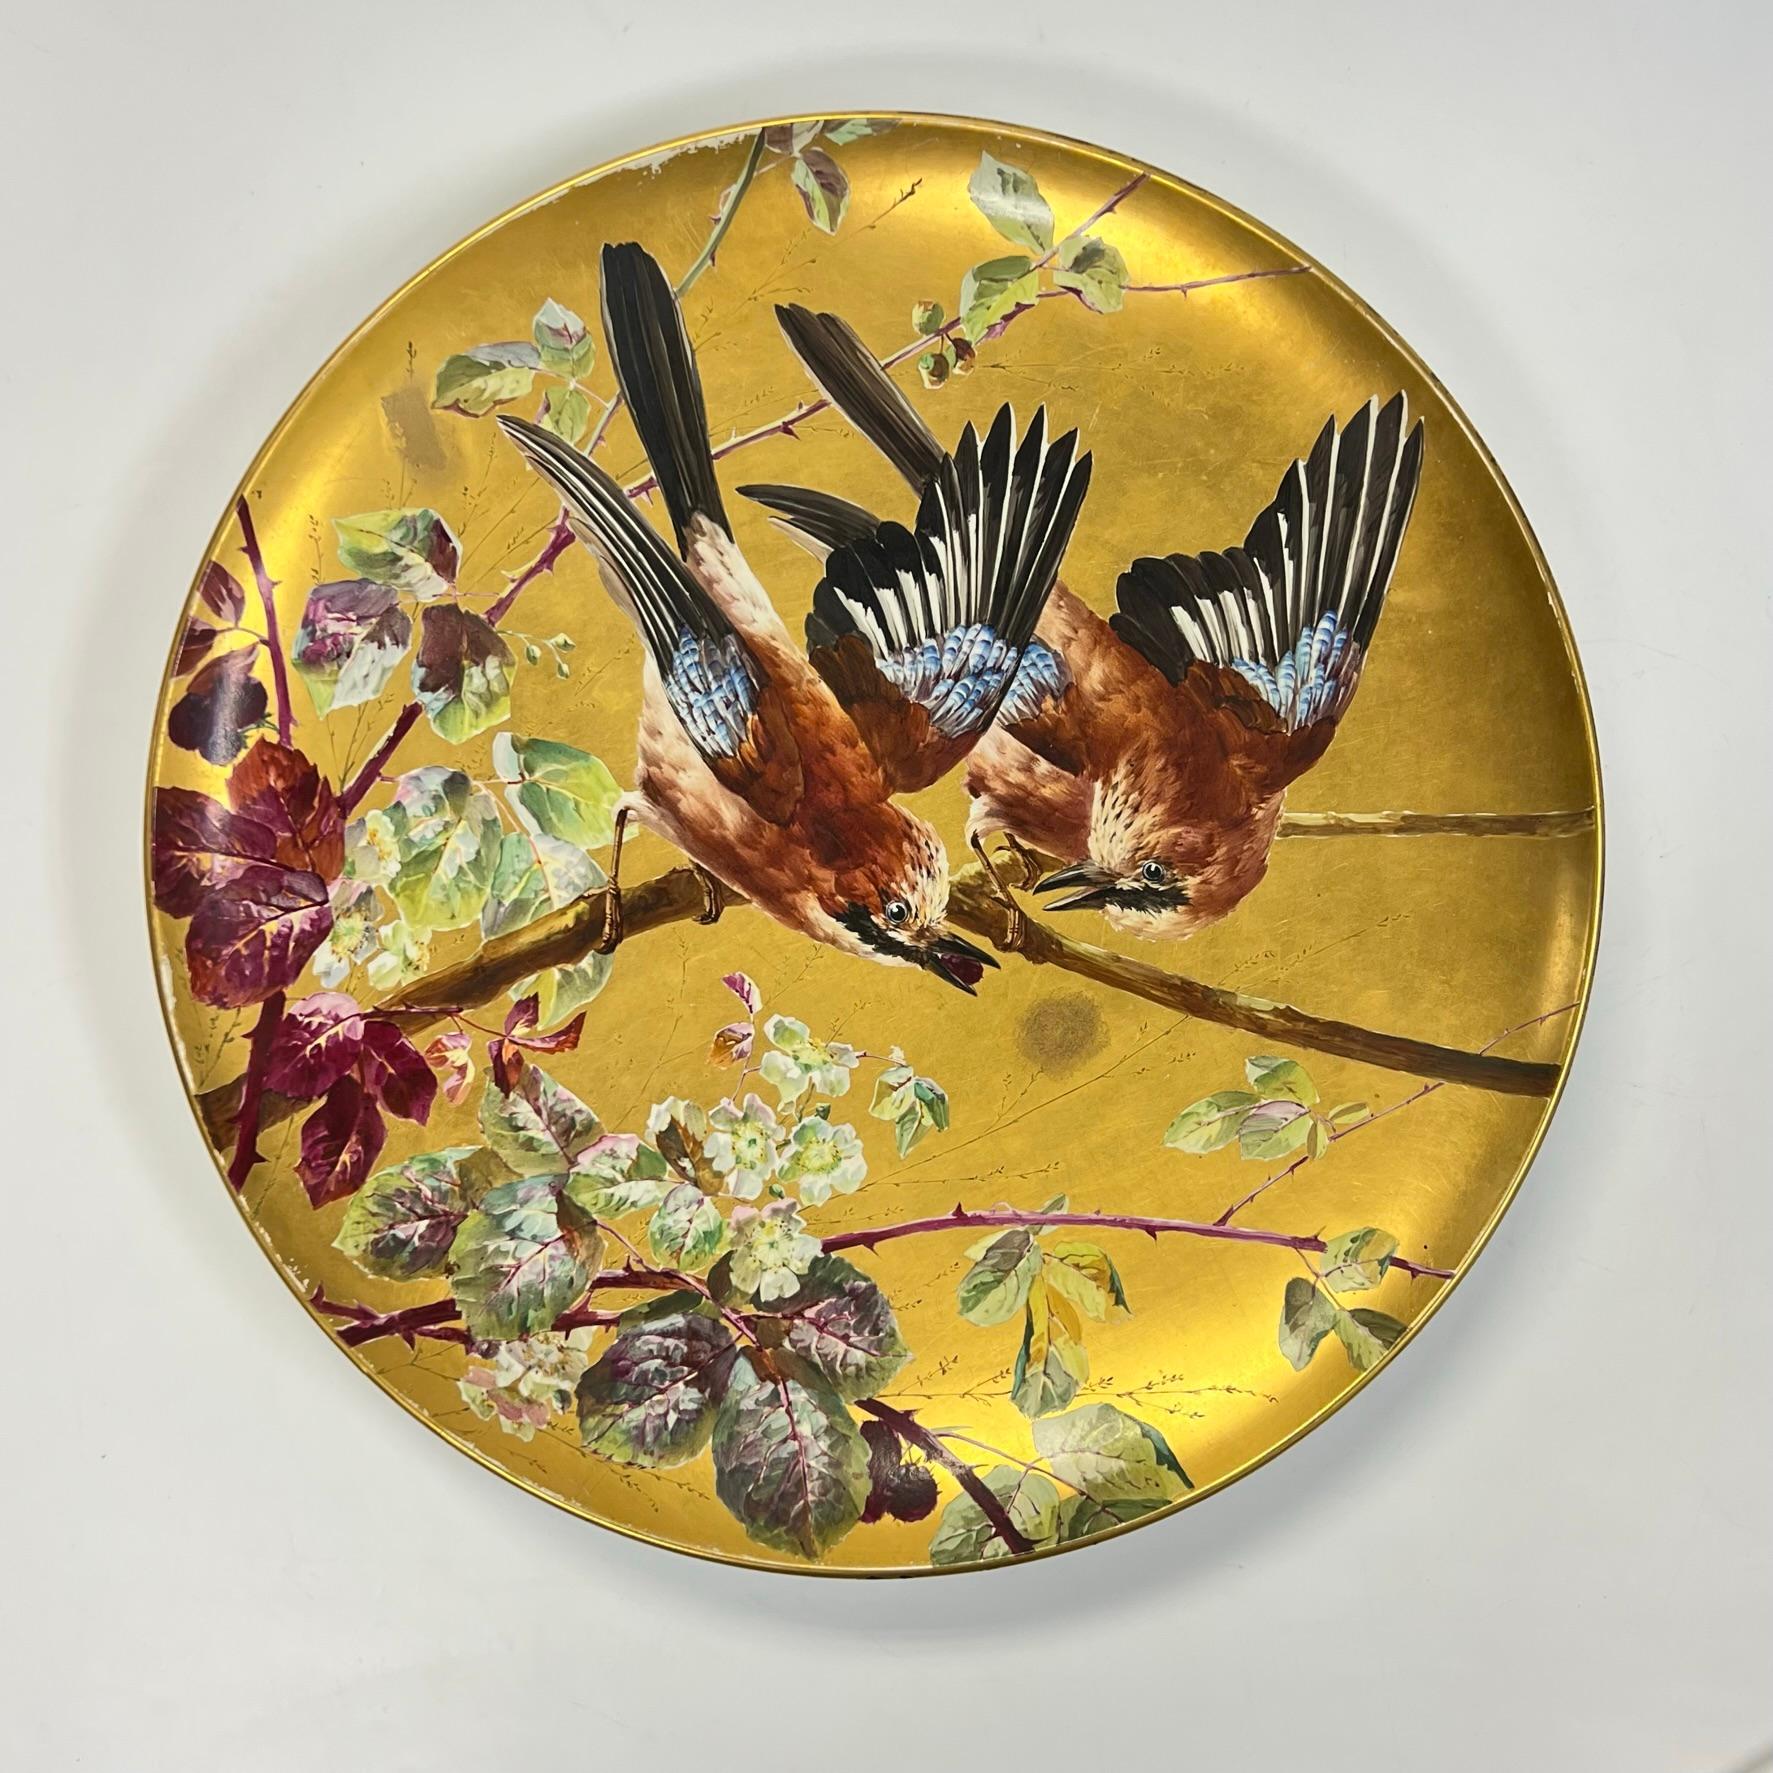 19th century French ornithological ceramic charger by Montereau B et Cie, depicting two perched songbirds.  In very good condition.